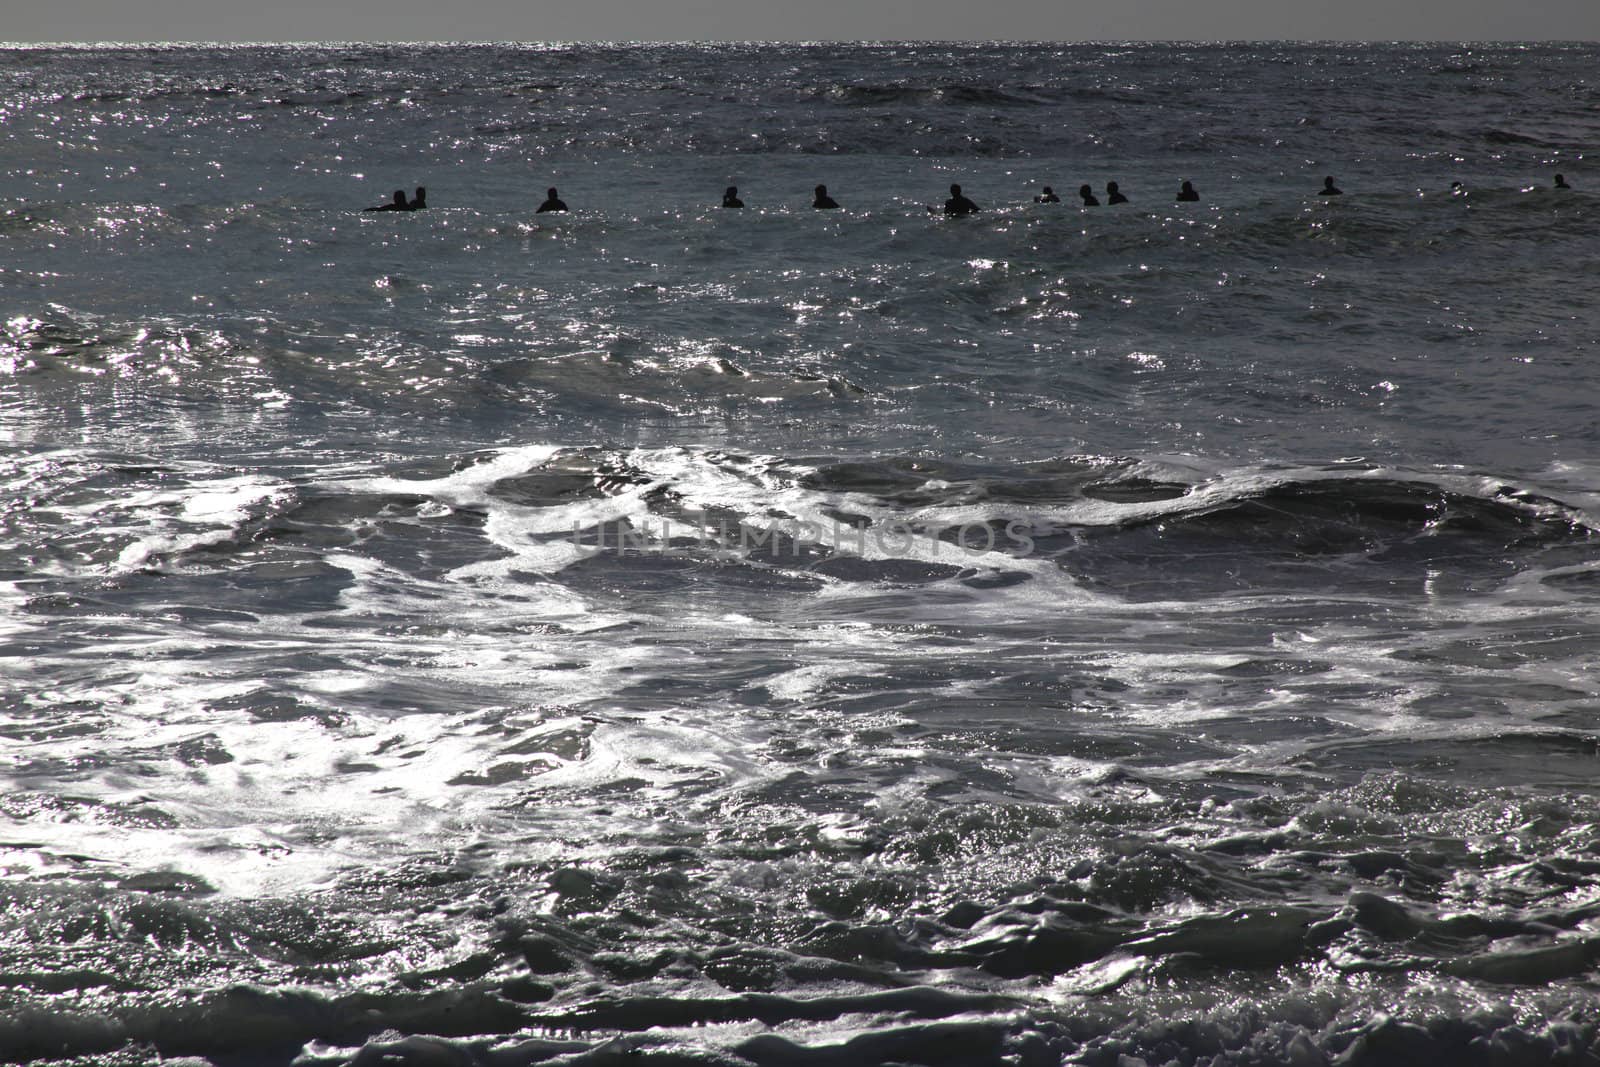 Surfers opening the season in Levanto, Italy.